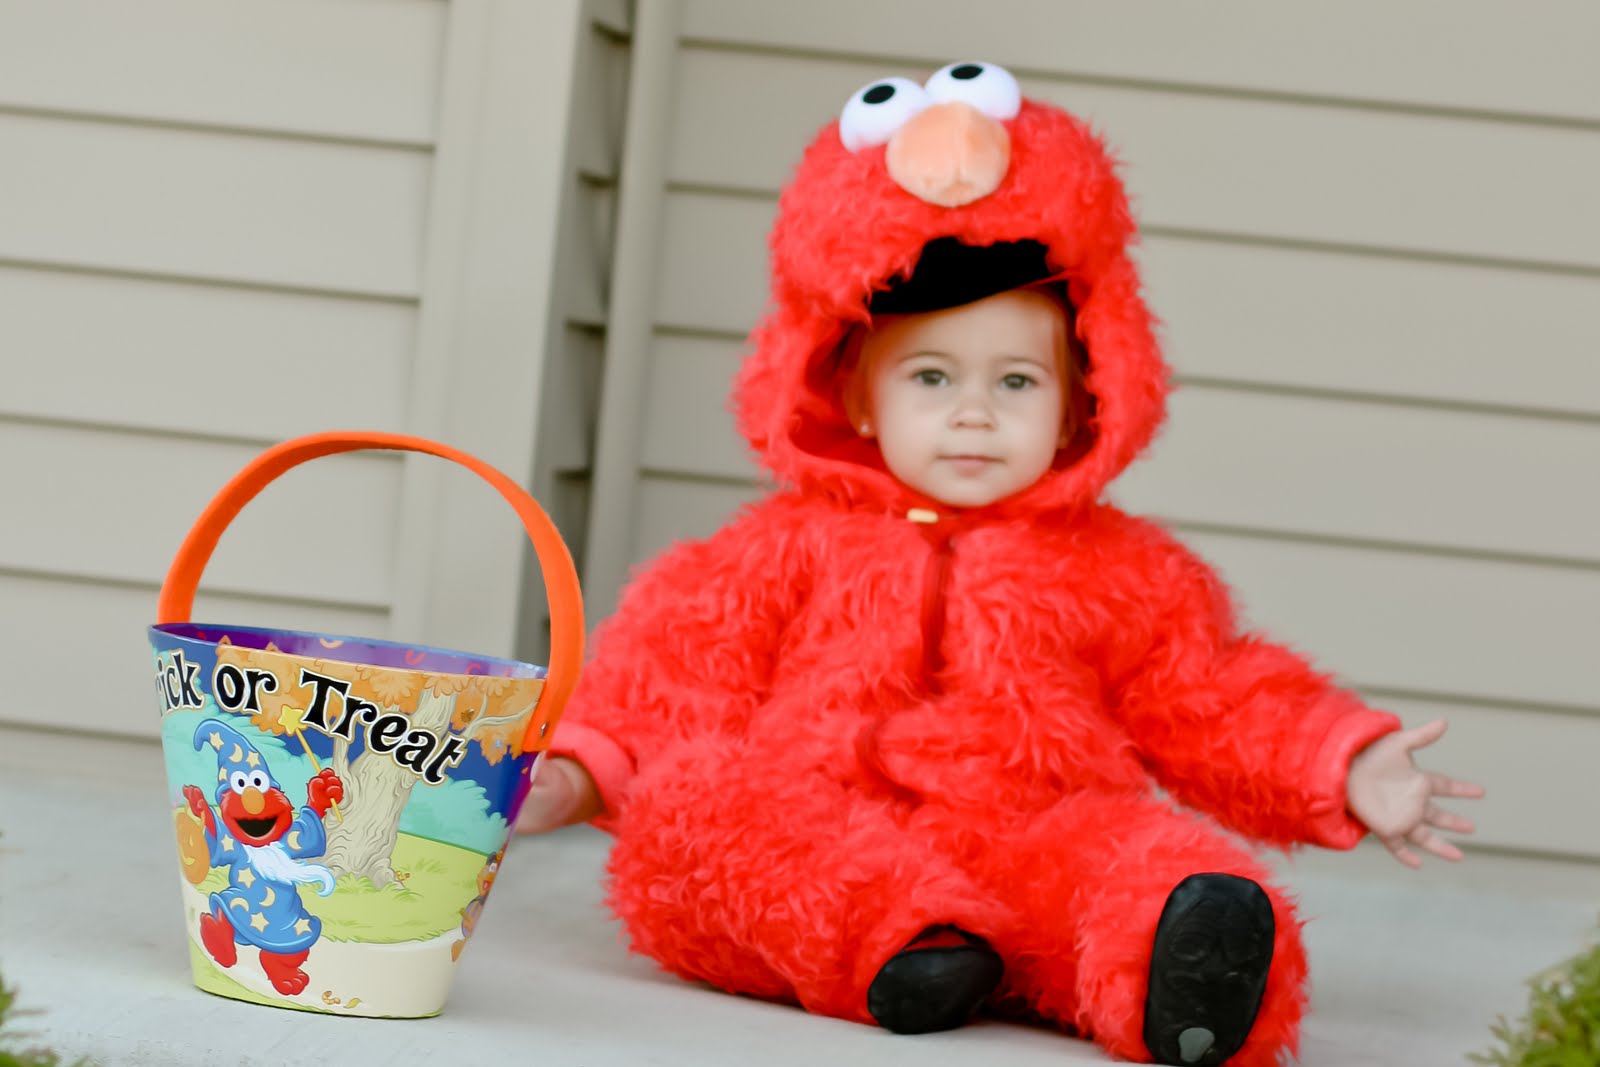 Love is picture perfect: Little Elmo goes trick or treating